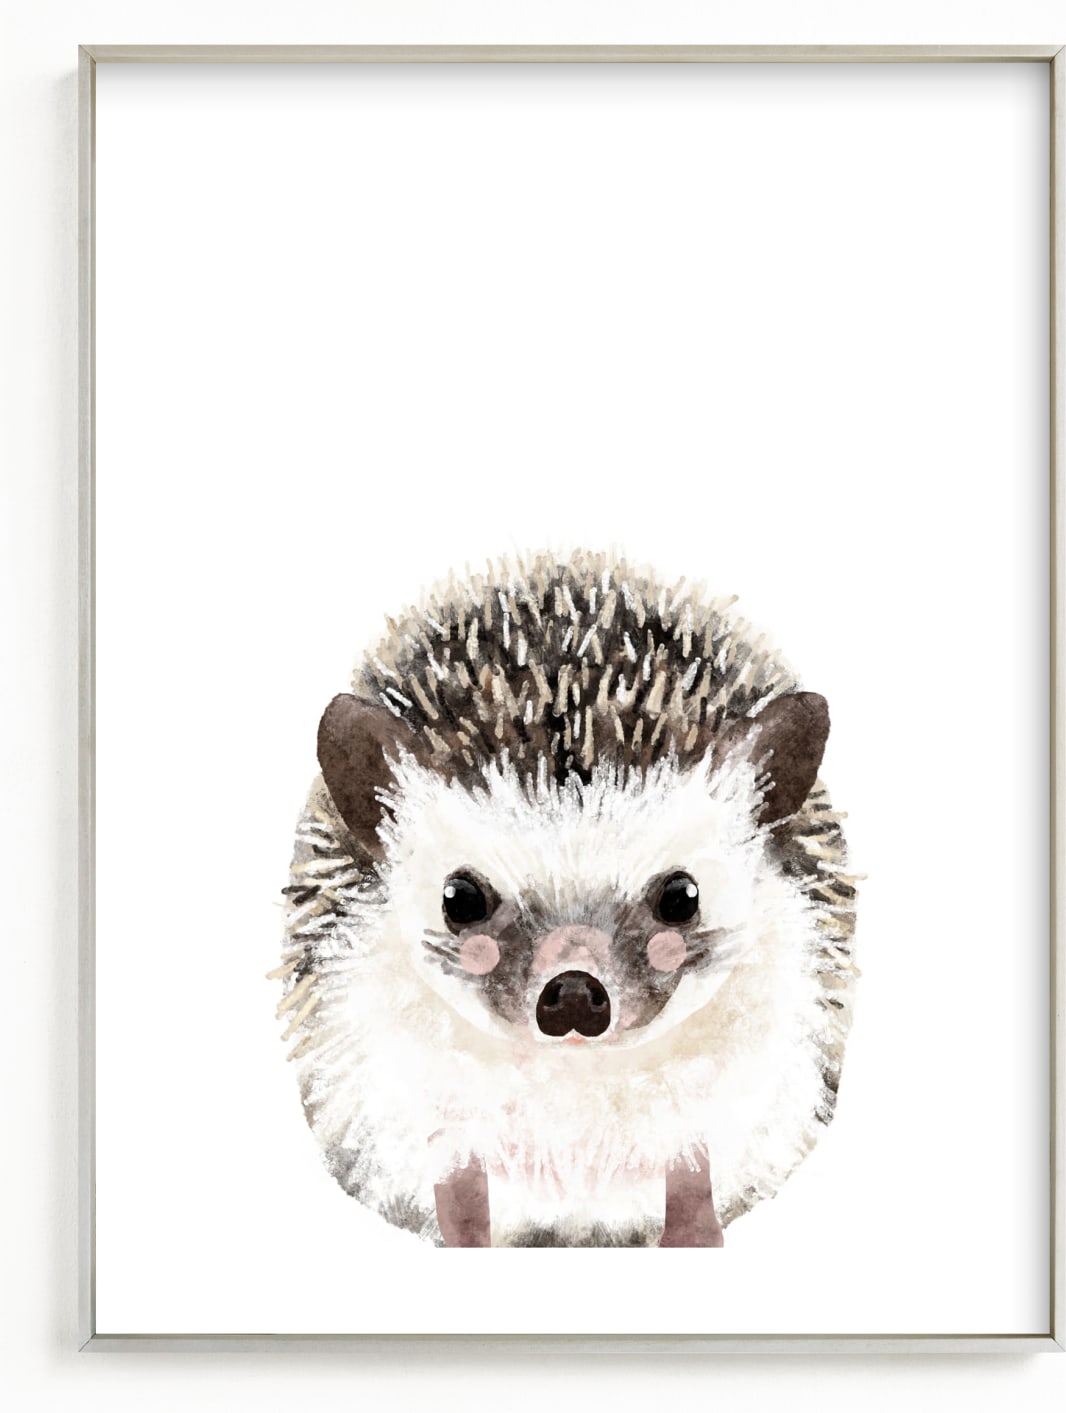 This is a brown, ivory art by Cass Loh called Baby Hedgehog.